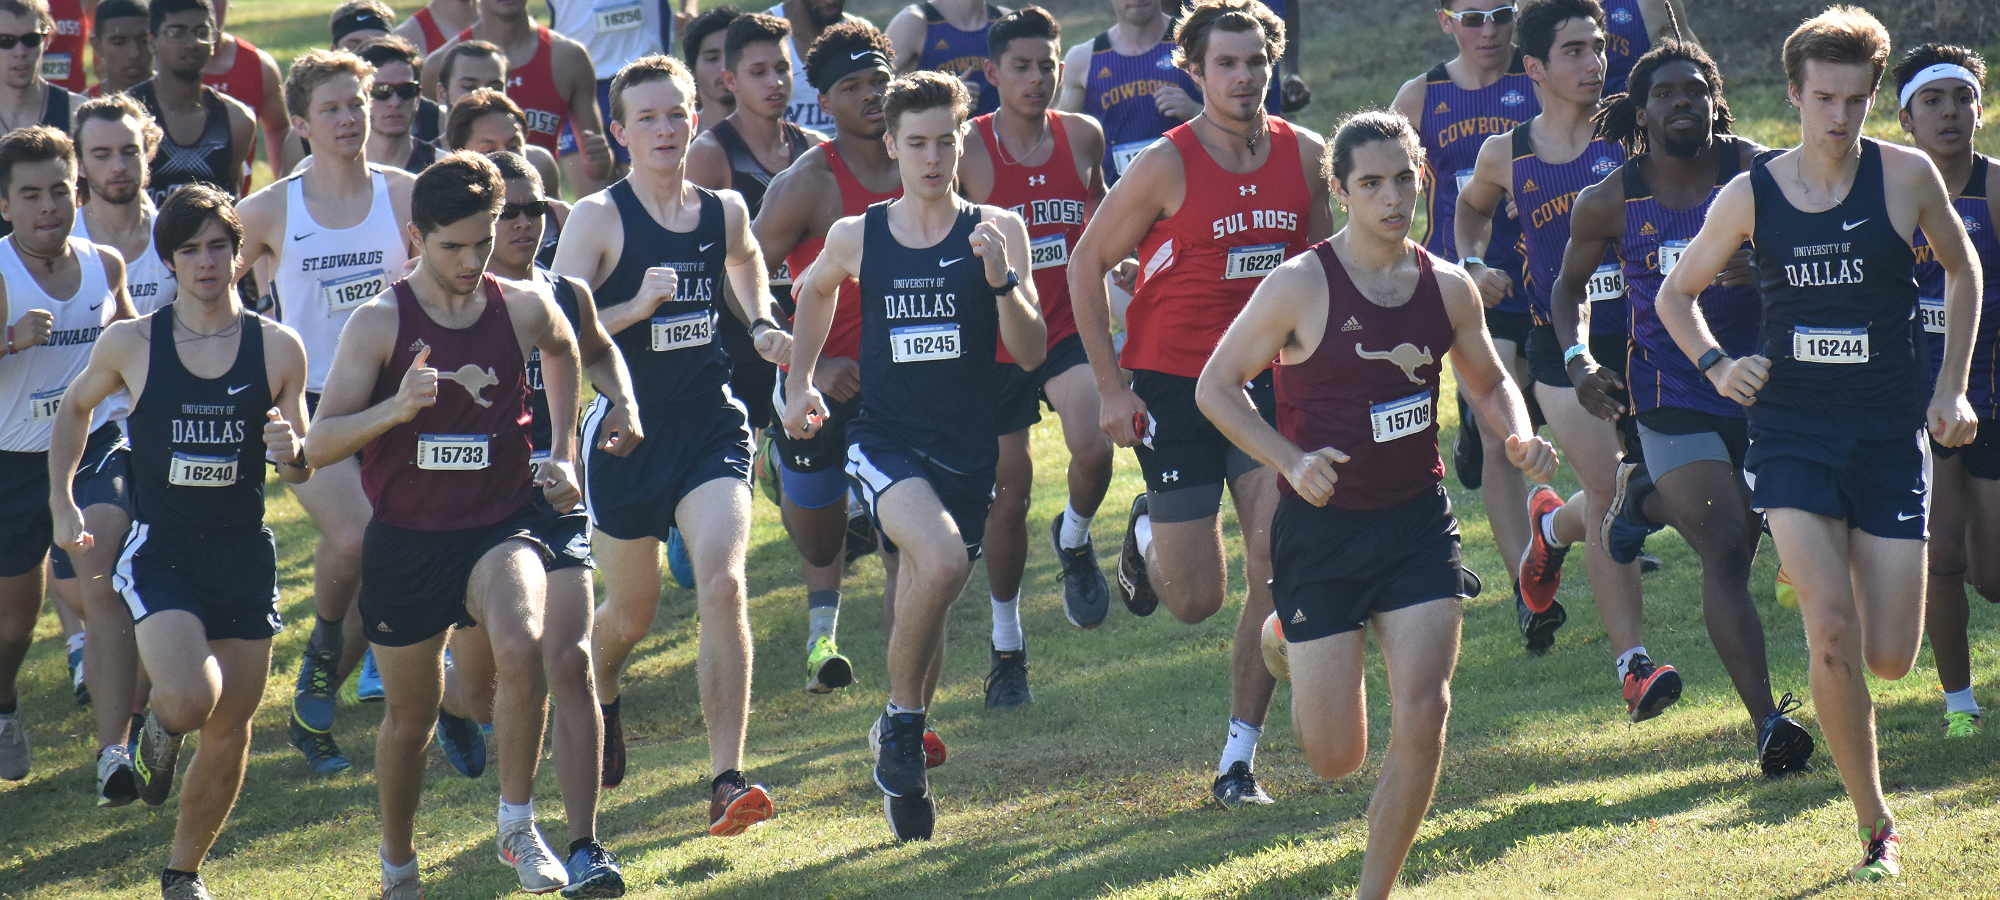 Crusaders race last 5k of fall and conclude regular season at home invitational.